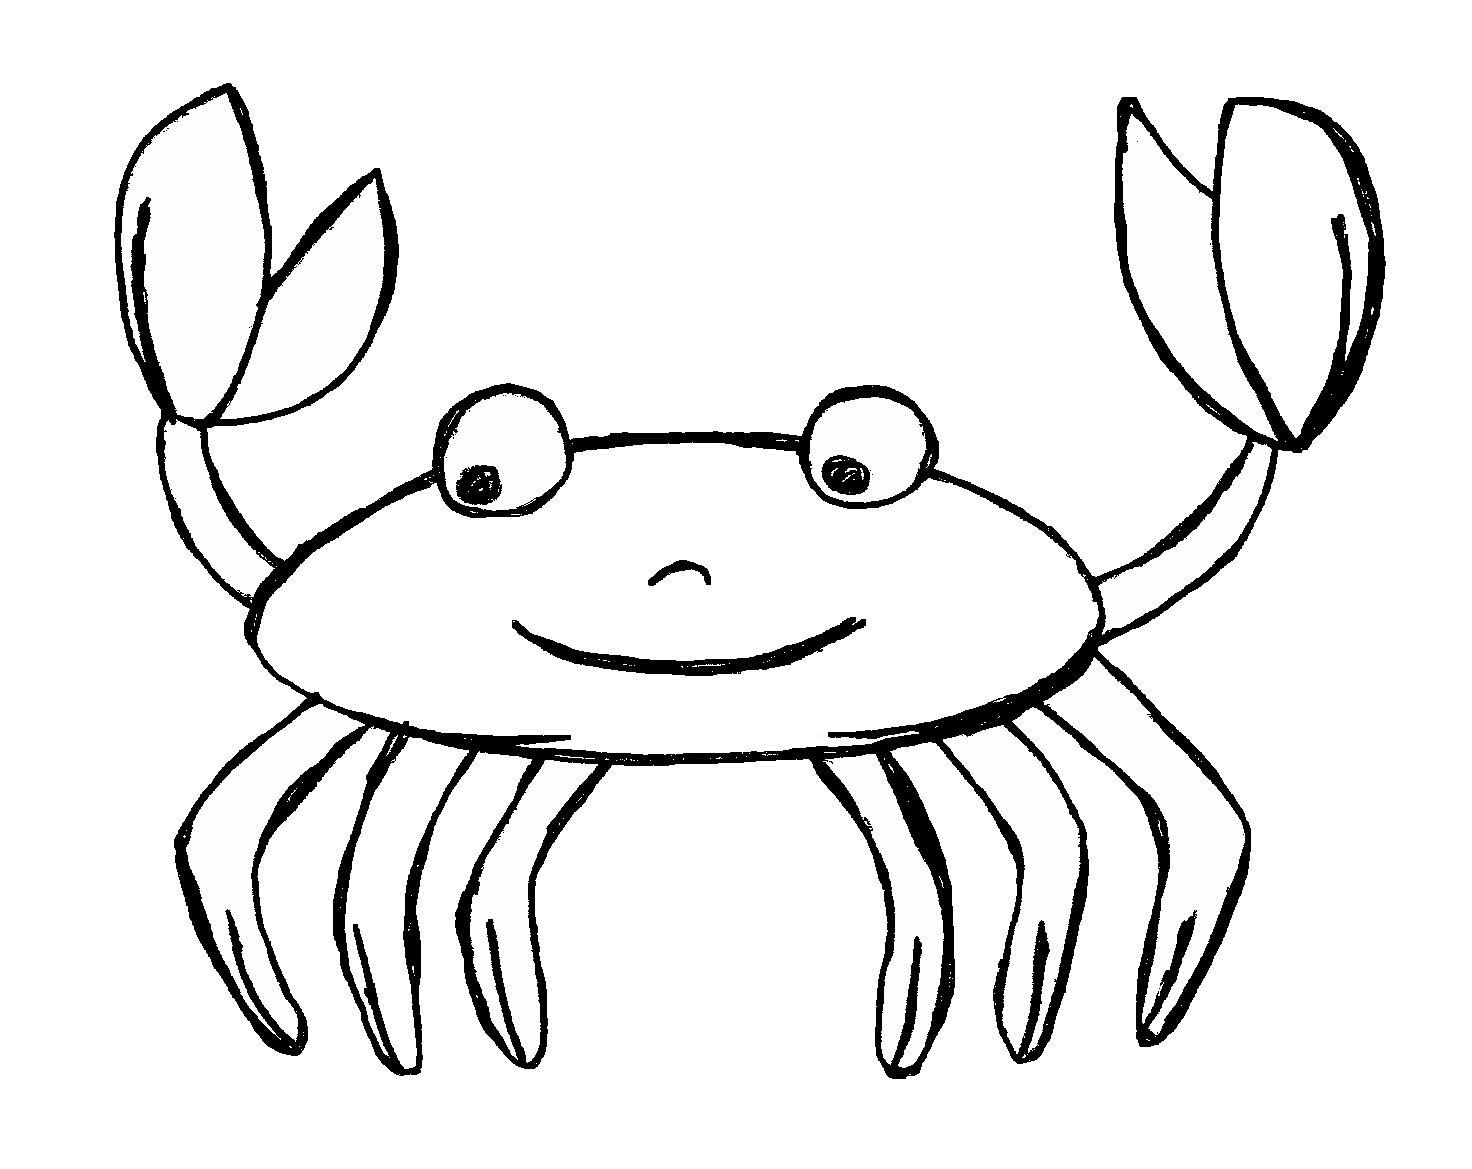 Octopus  black and white cute octopus clipart black and white clipartfest